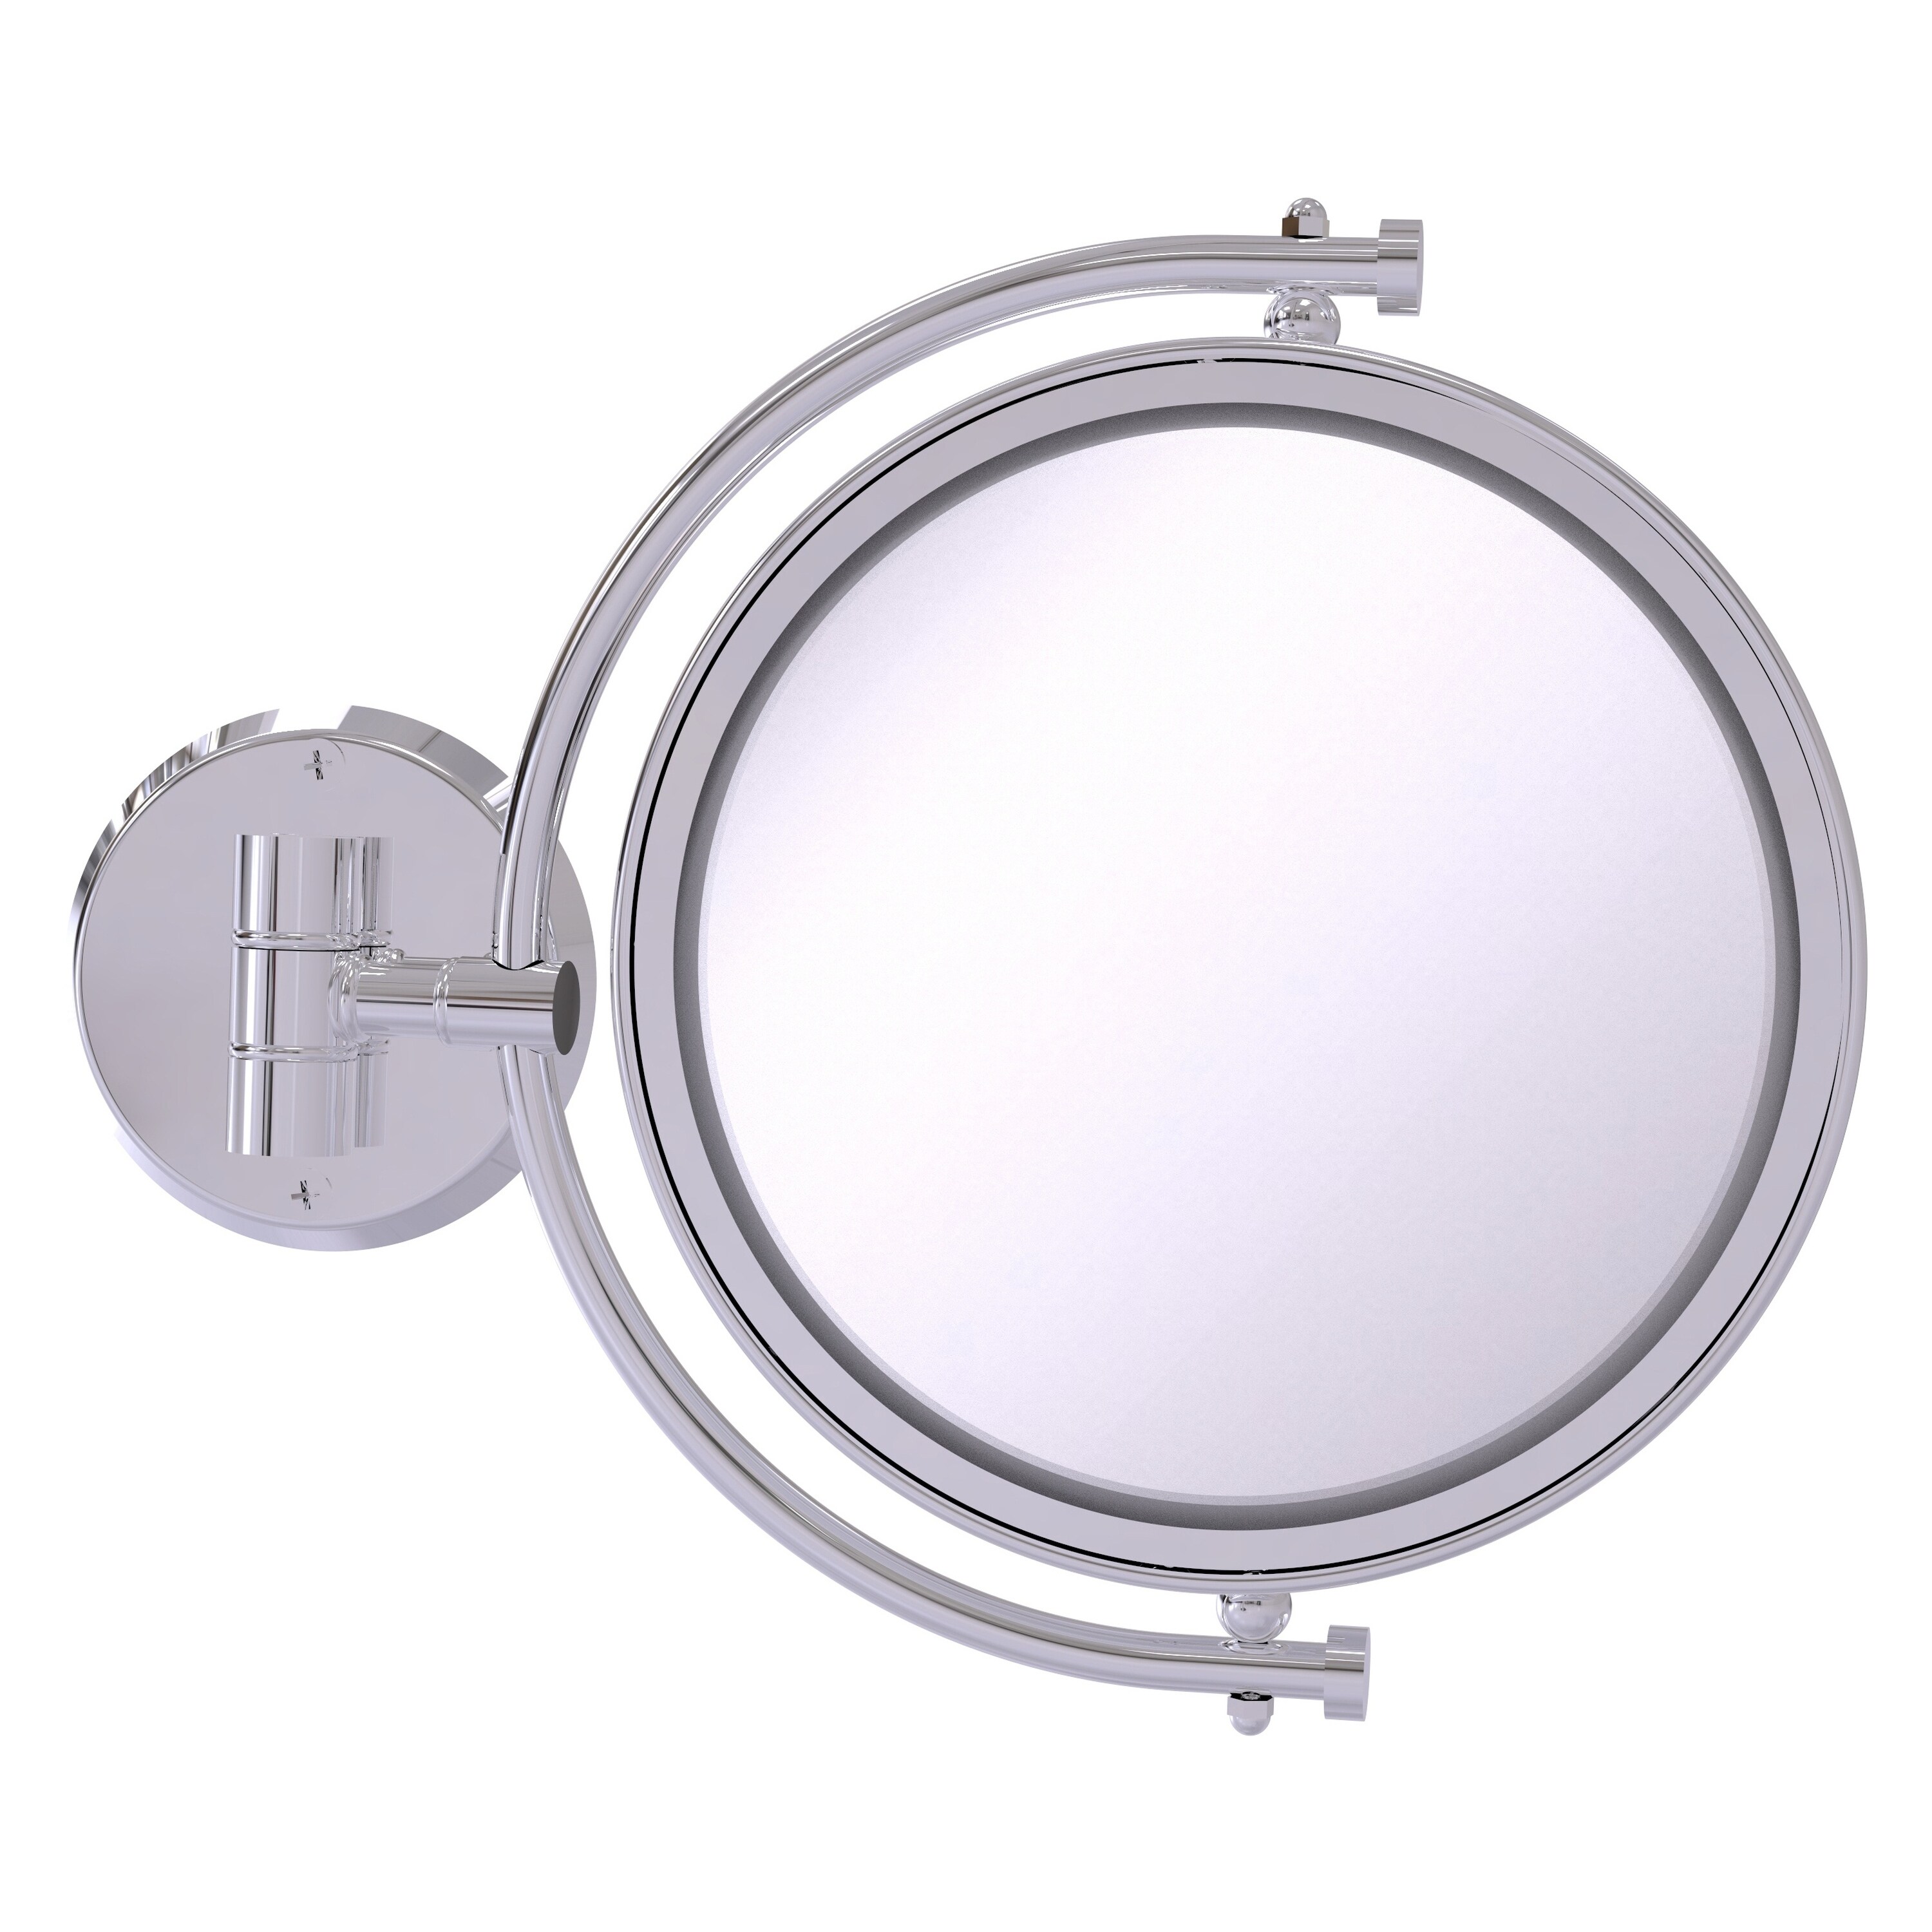 8-in x 10-in Polished Chrome Double-sided 2X Magnifying Wall-mounted Vanity Mirror | - Allied Brass WM-4/2X-PC